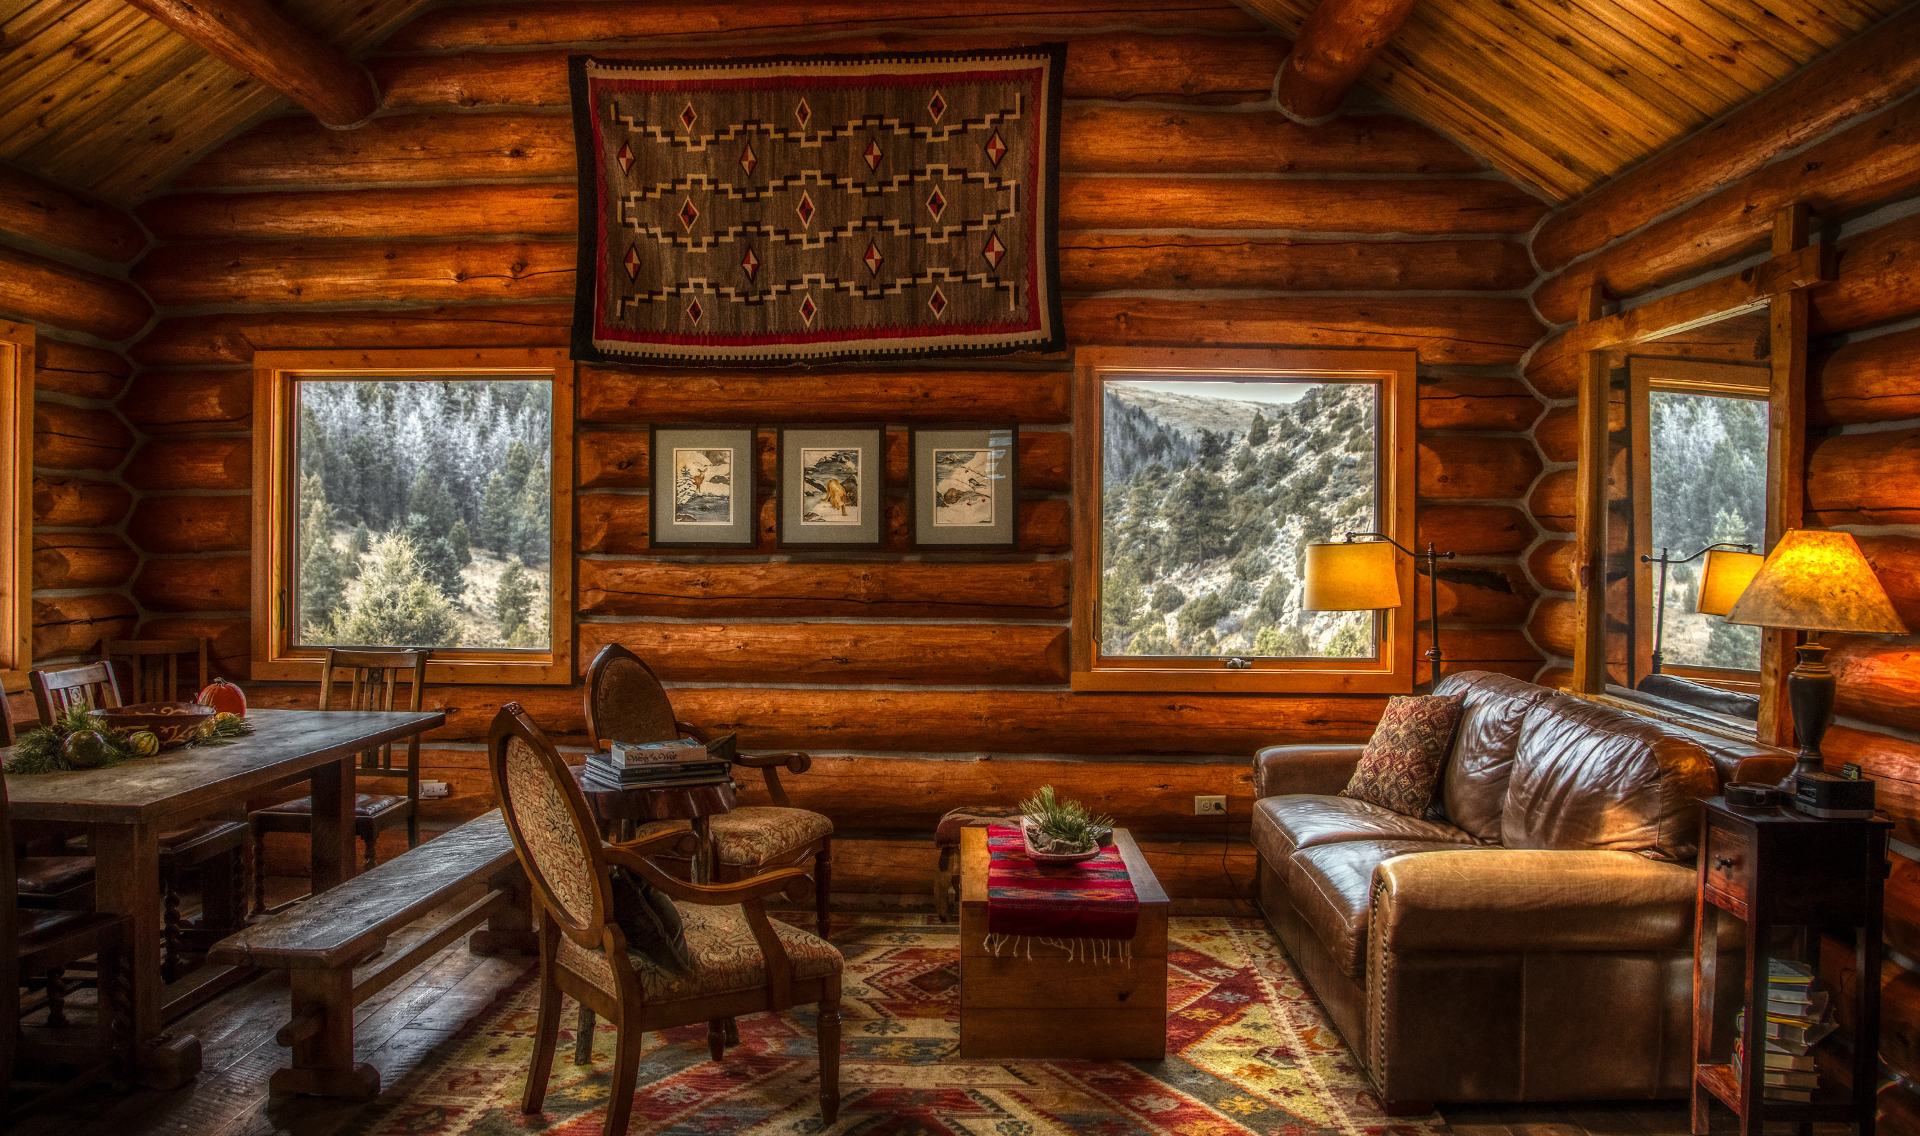 INT. COSY CABIN – DAY